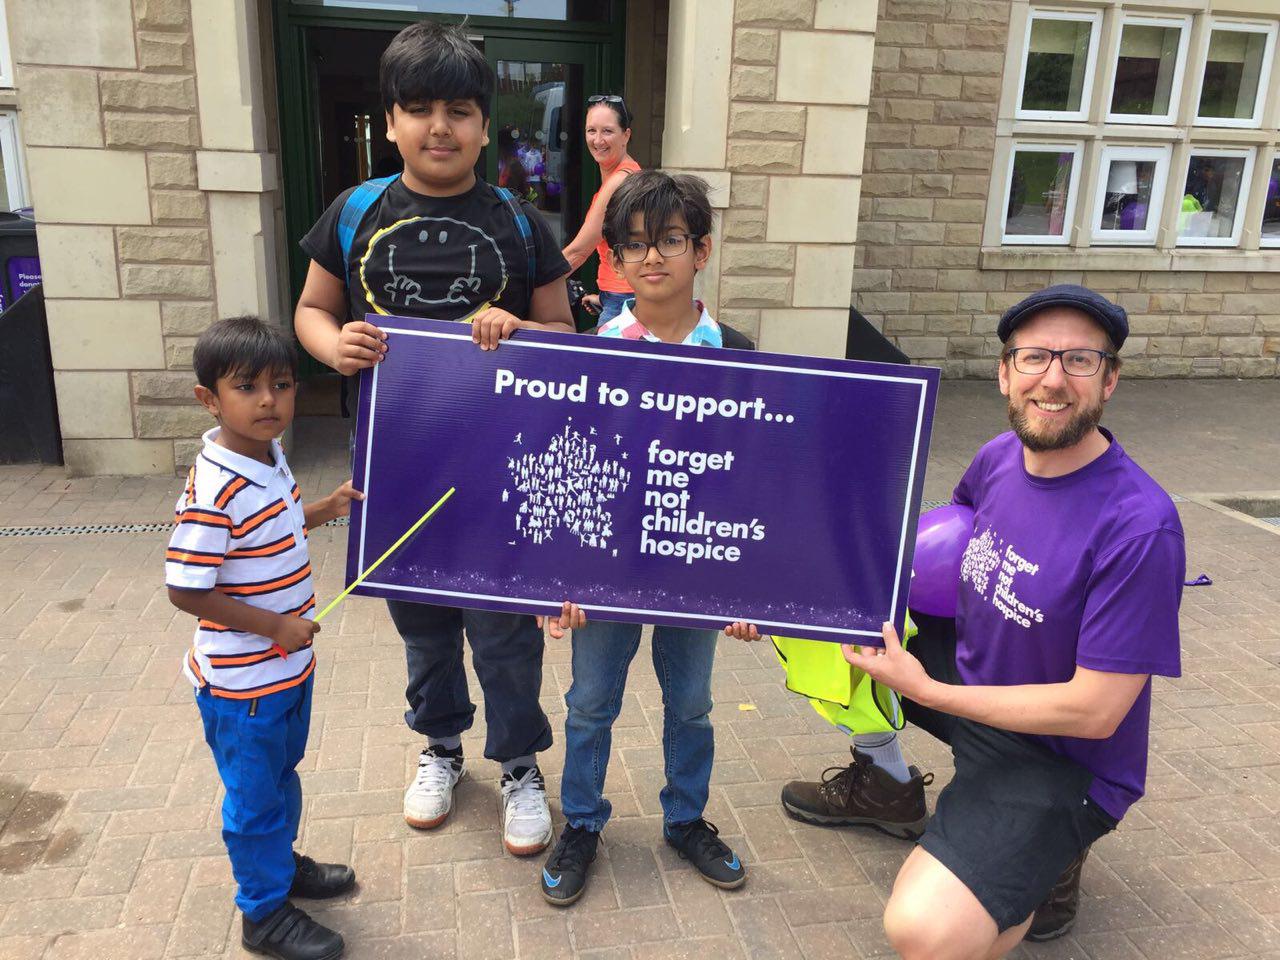 Over 50 children from Huddersfield, Spenvalley and Sheffield put on their trekking books to raise money for Forget Me Not Children’s Hospice. The walk formed part of AMYA’s annual ‘Mercy4Mankind’ campaign, which includes regular homeless feeding sessions, tree planting and hospital and care home visits.